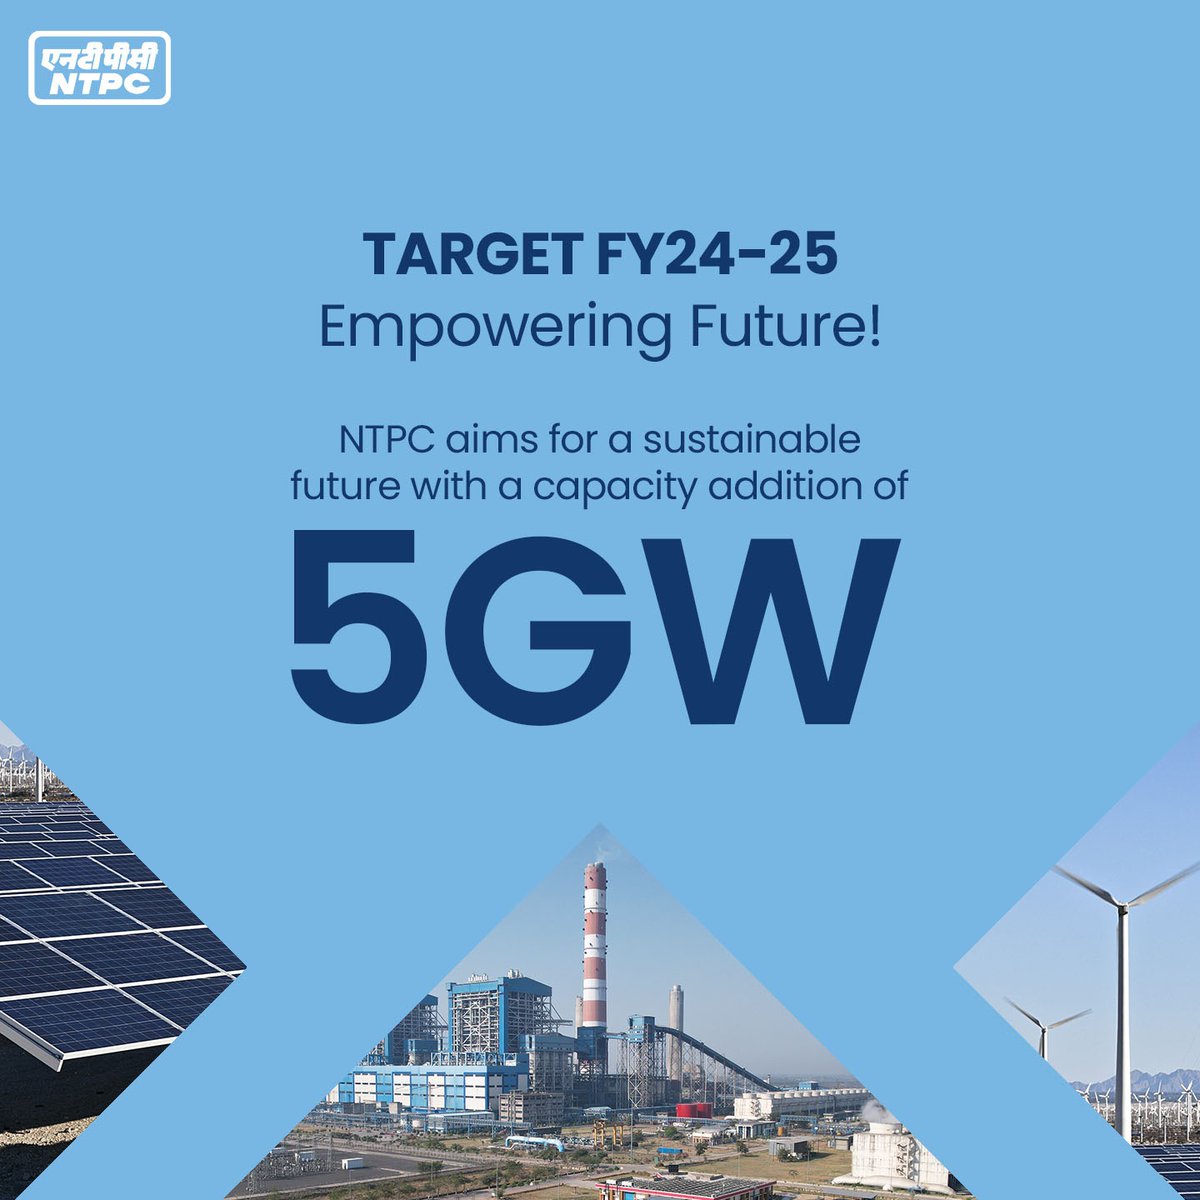 In FY25, NTPC aims to add 5 GW capacity, strengthening India's energy security . This includes 3 GW RE portfolio and 2GW thermal capacity. NTPC is committed to providing clean, reliable and affordable energy for a sustainable future. #CapacityAddition #RenewableEnergy…